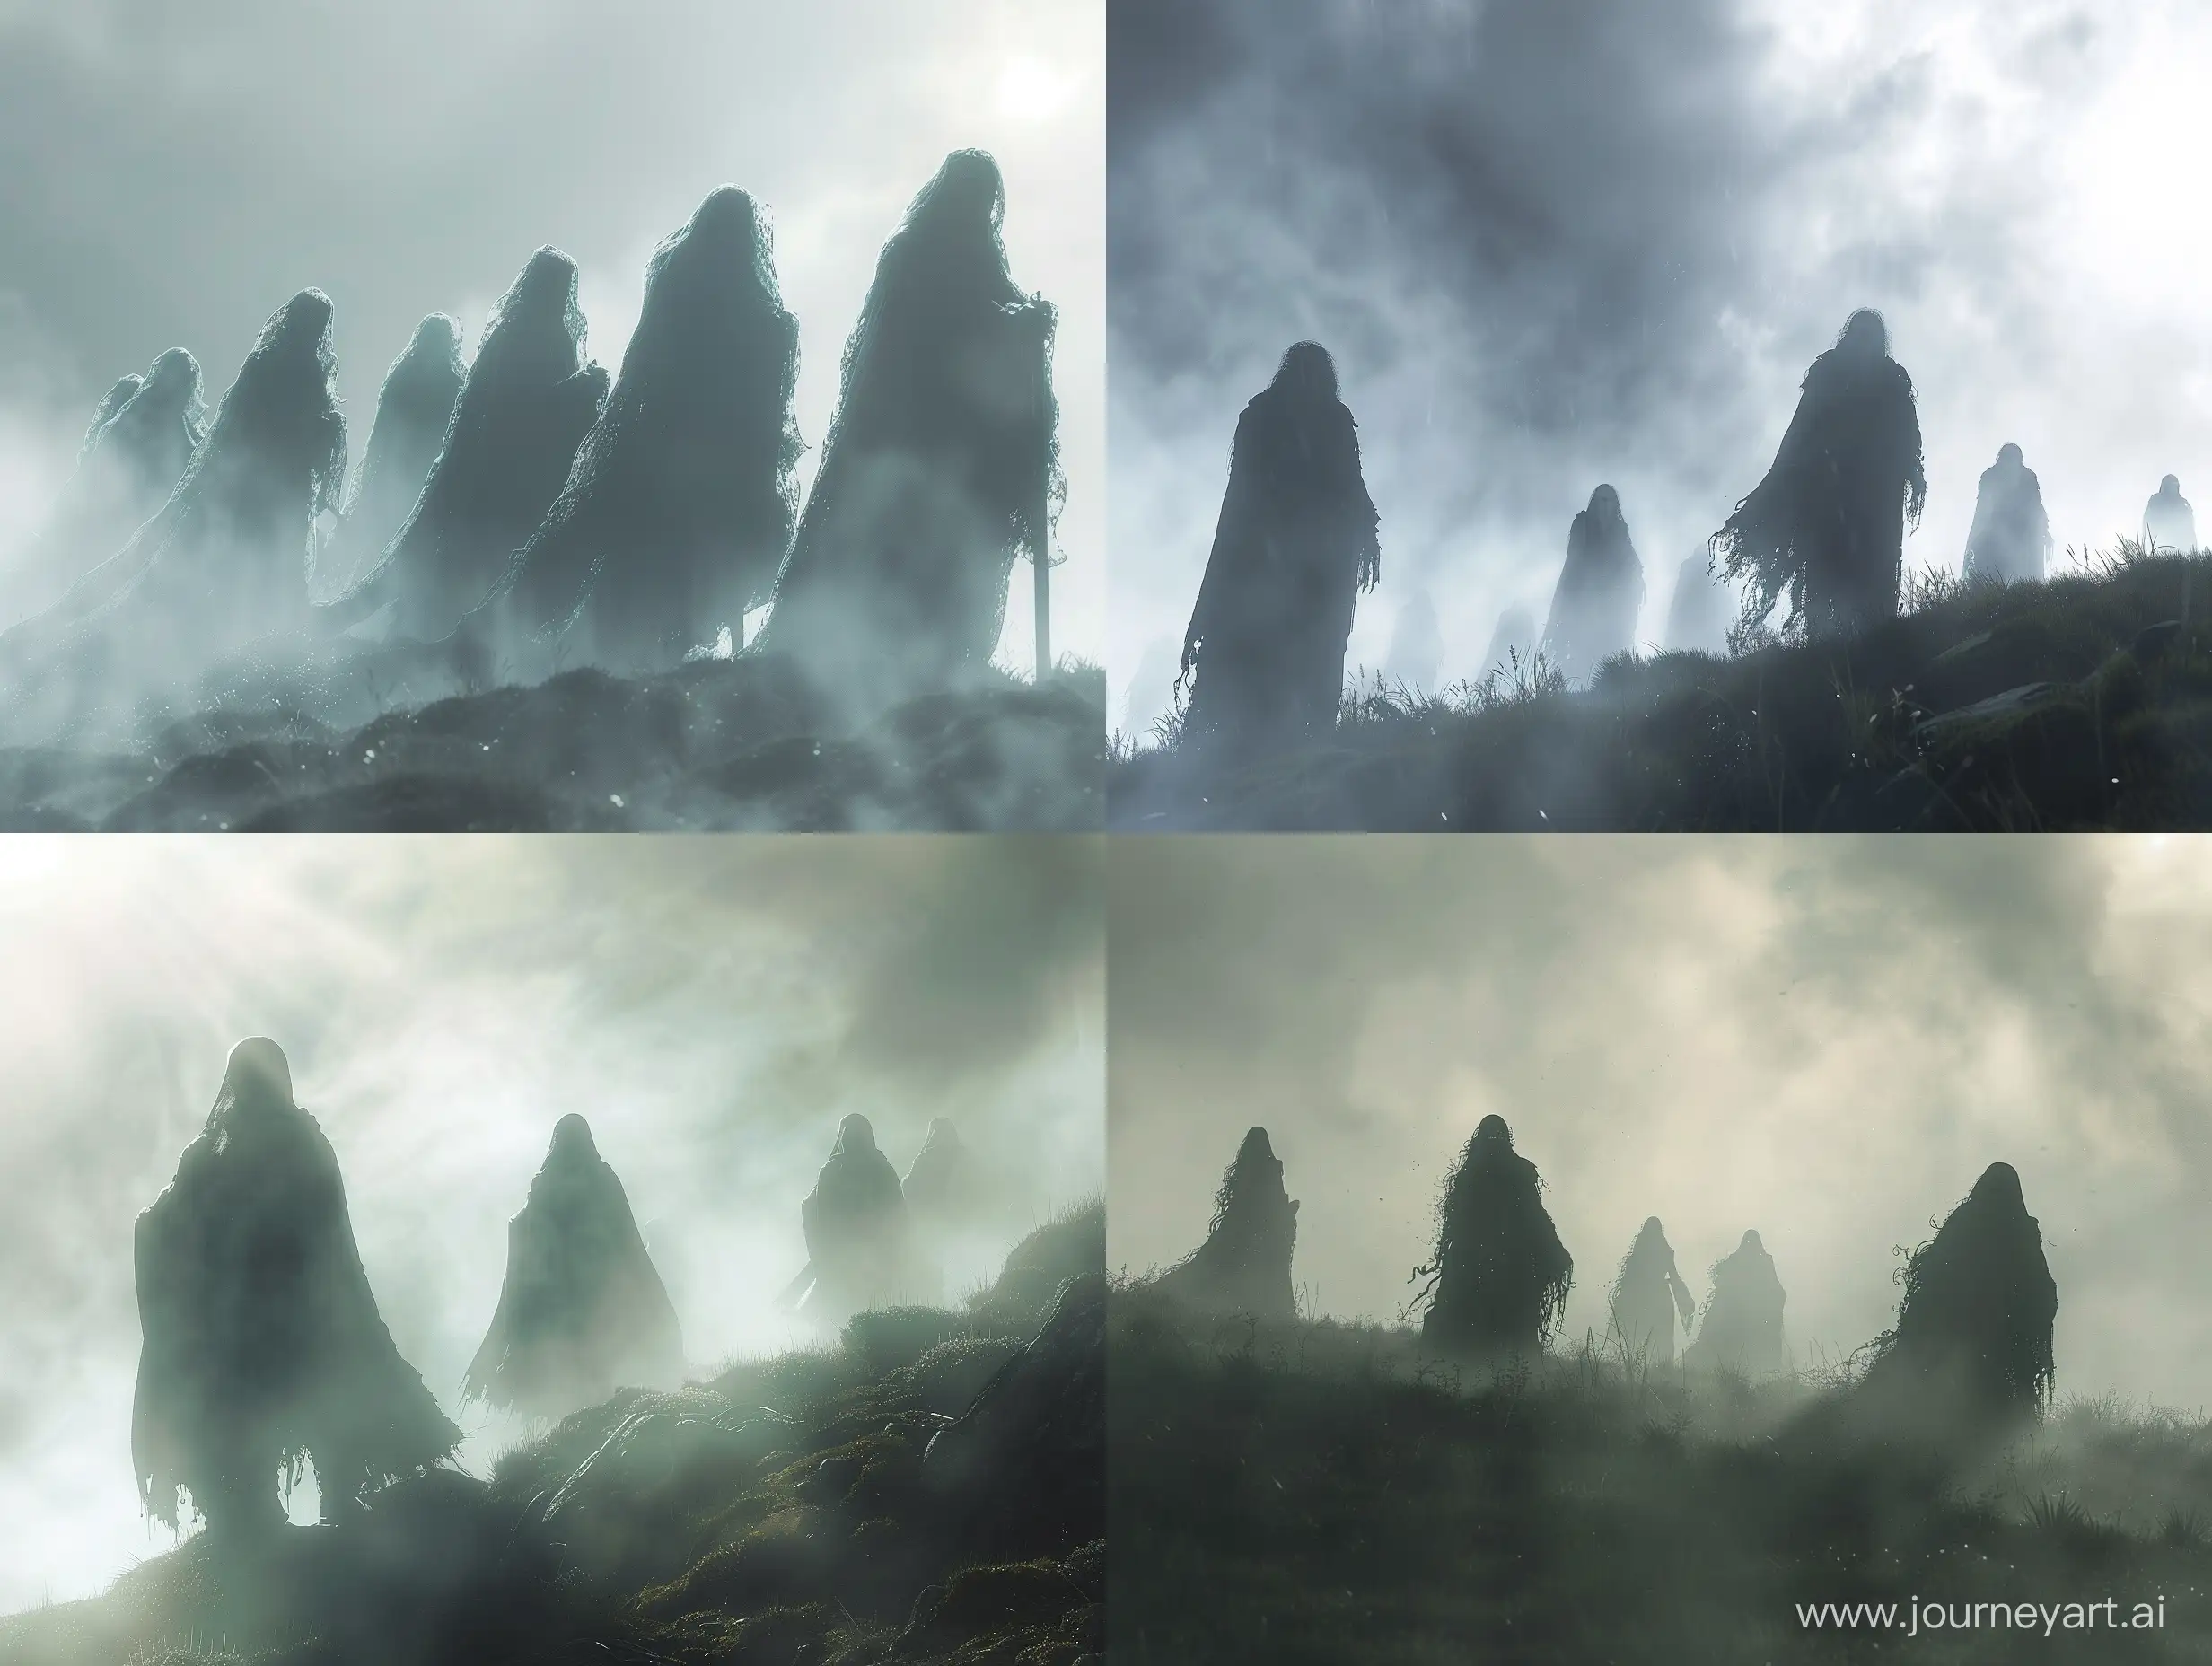 Lord of the Rings Wraiths emerging from the fog photonegative refractograph silouhette backlit in the atmospherics gradient value extrusion and displacement specular breakup and contrast heavy ambient occlusion overlay parallax depth gradient value extrusion and displacement specular breakup and contrast heavy ambient occlusion overlay parallax depth rim lighting cinematic lighting caustics color pops moody lighting and backlit heavy atmospherics contrasty shadow and light severe weather oscar winning visual fx imax quality visuals ilm weta digital uhd multisample antialiasing subtle color ar weird Image